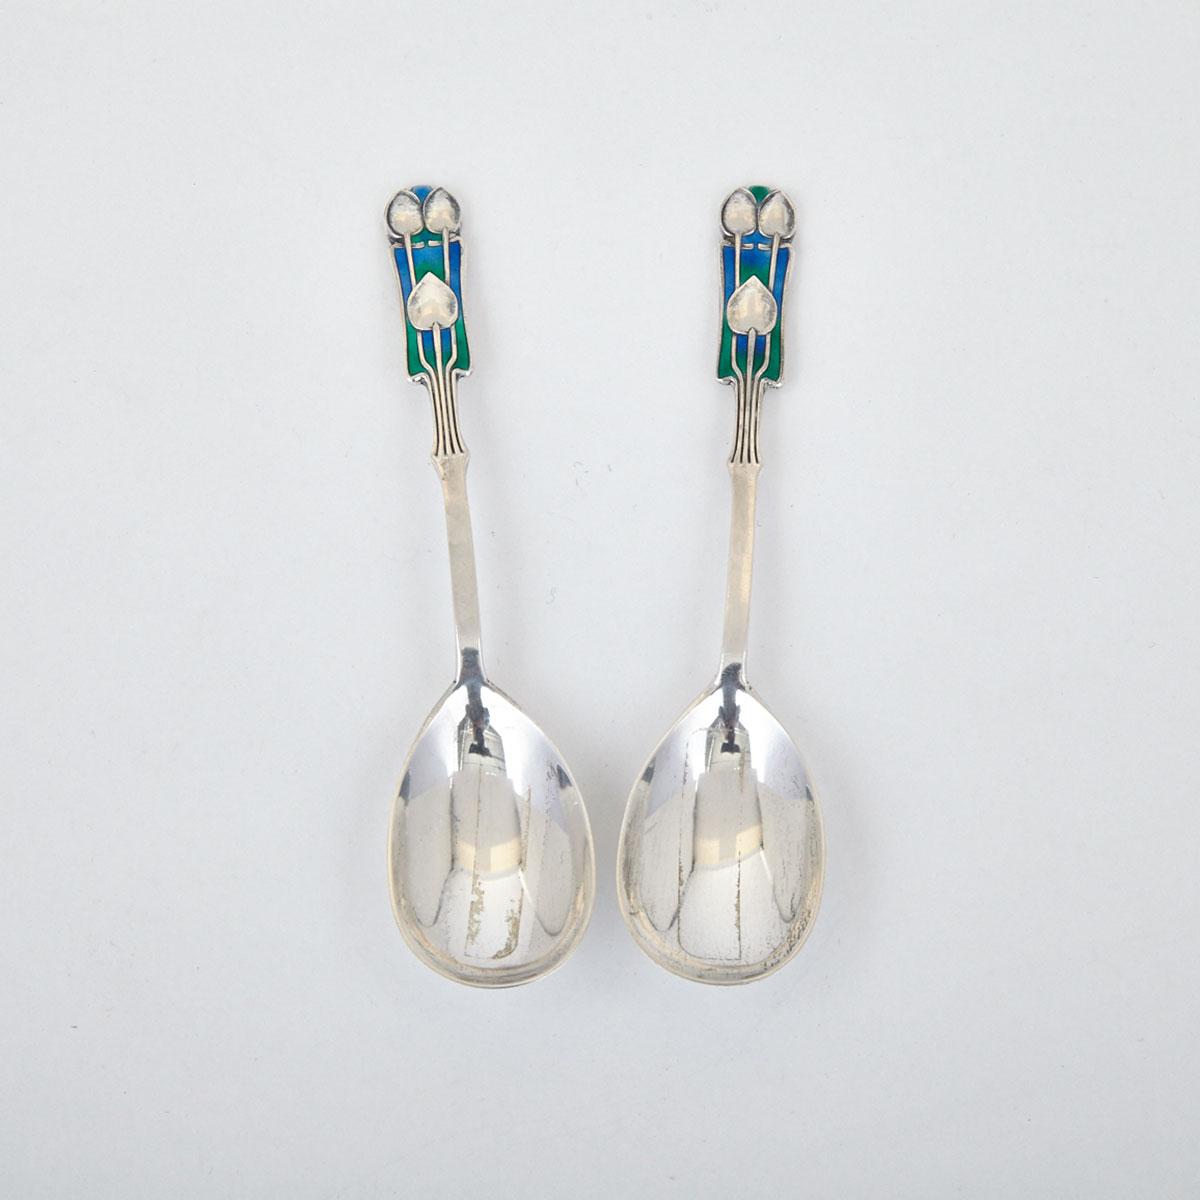 Pair of English ‘Cymric’  Silver and Enamel Tea Spoons, Archibald Knox for Liberty & Co., Birmingham, 1935